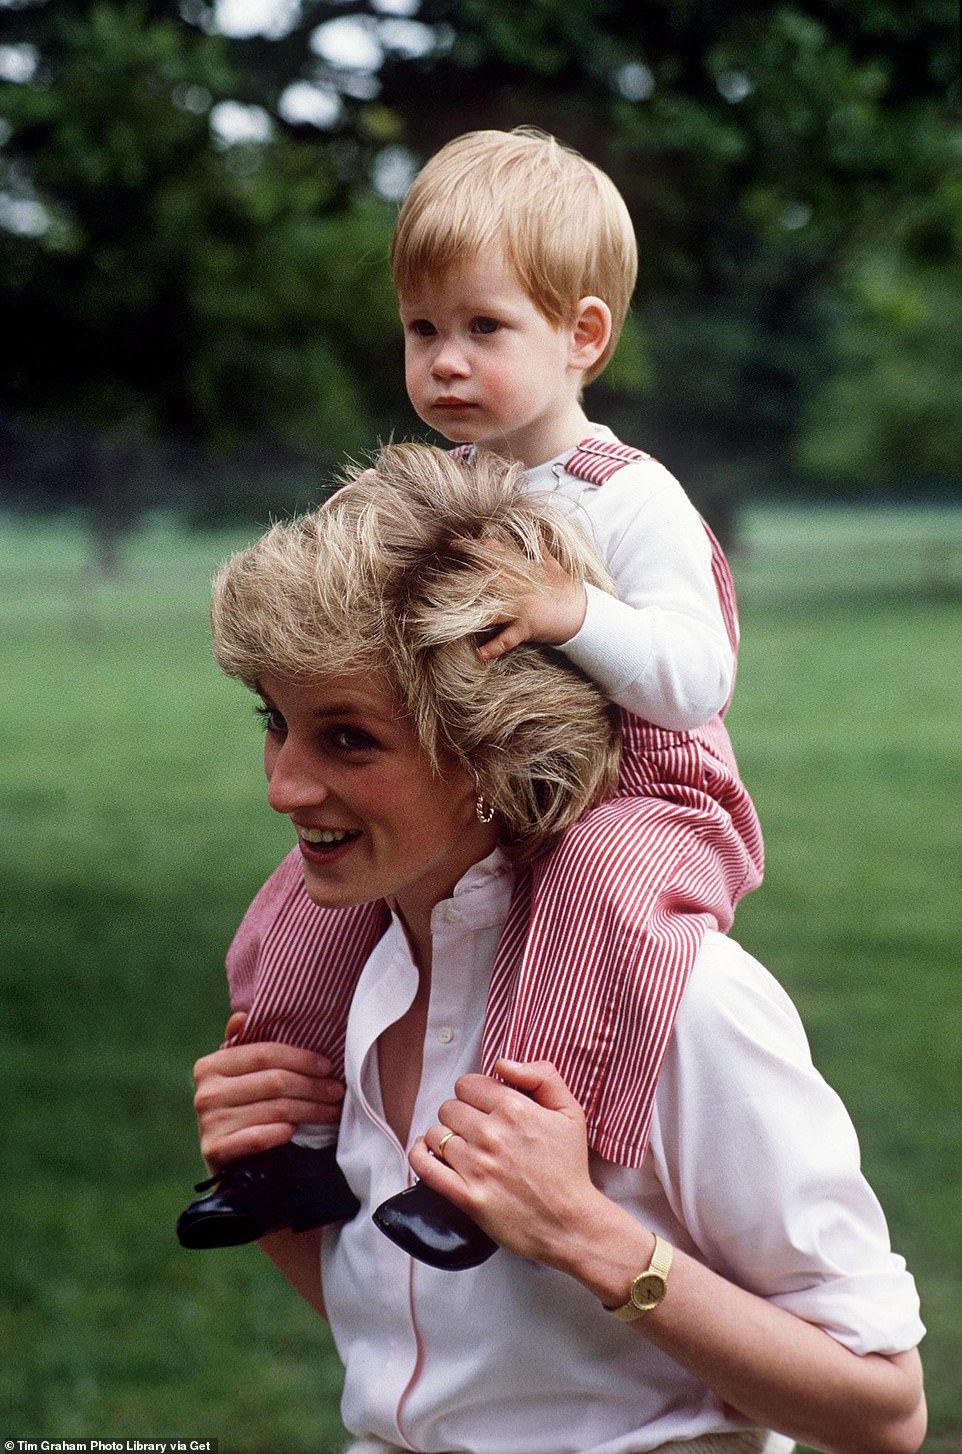 While it bears the above picture of Diana, and Harry describes himself as 'his mother's son' on the site, there is no photograph or mention of his father Charles